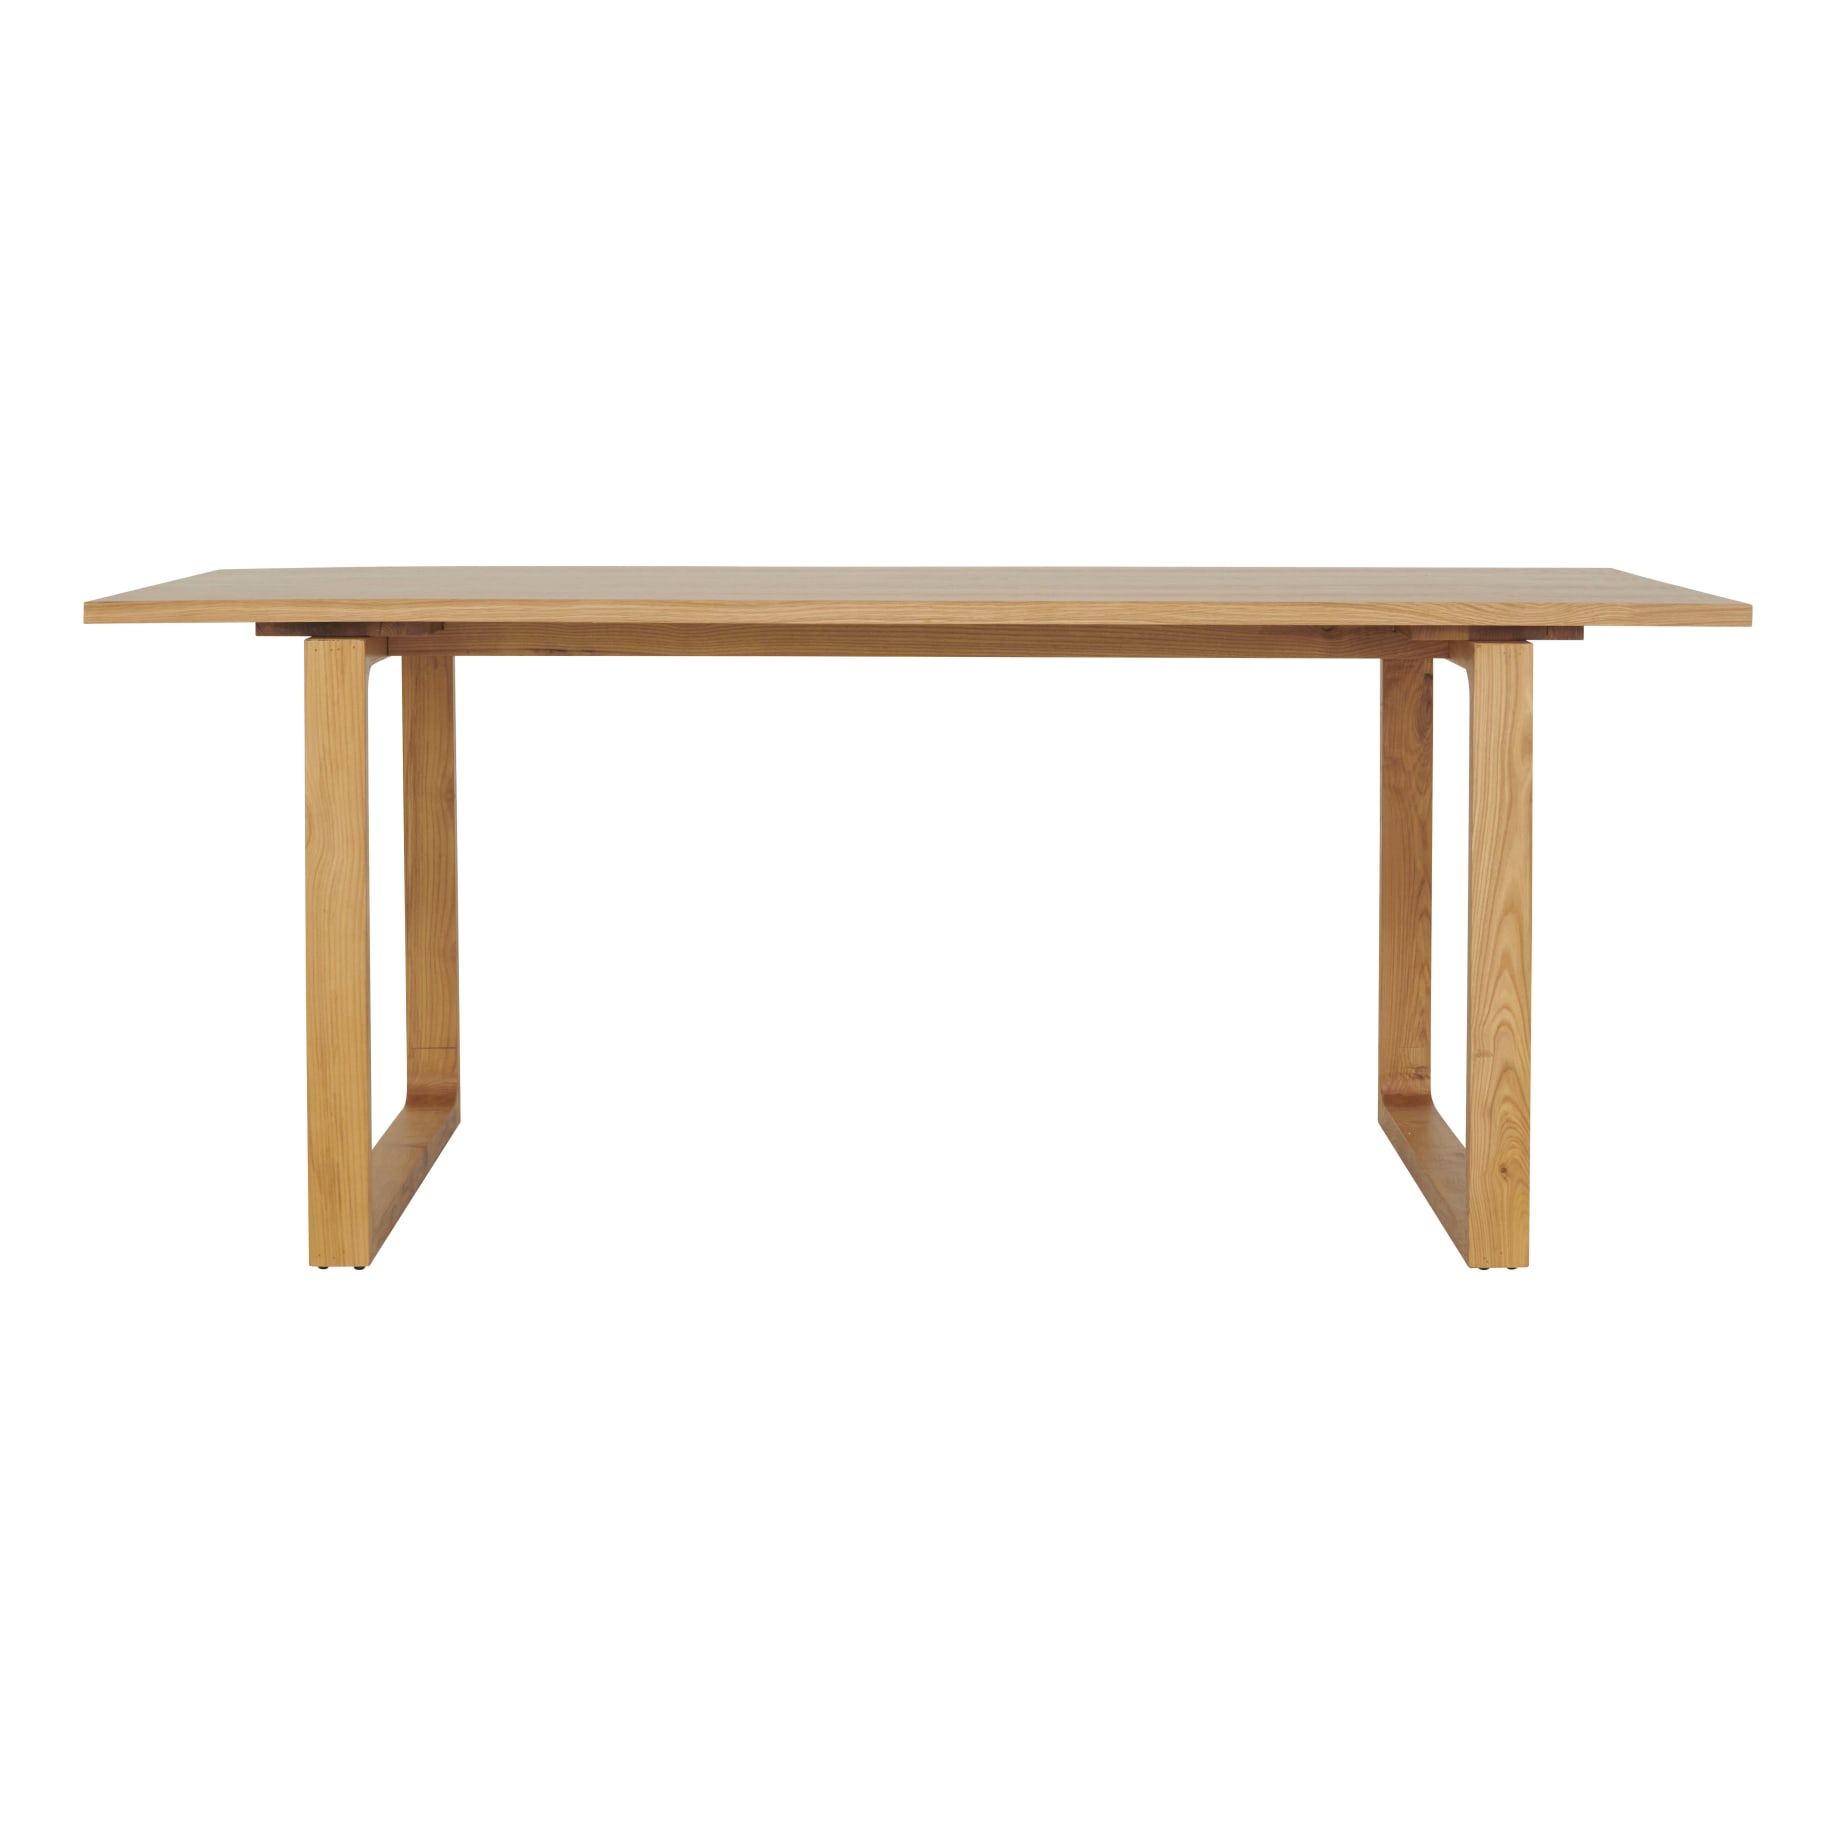 Mira Dining Table 190cm in Rattan Clear Lacquer